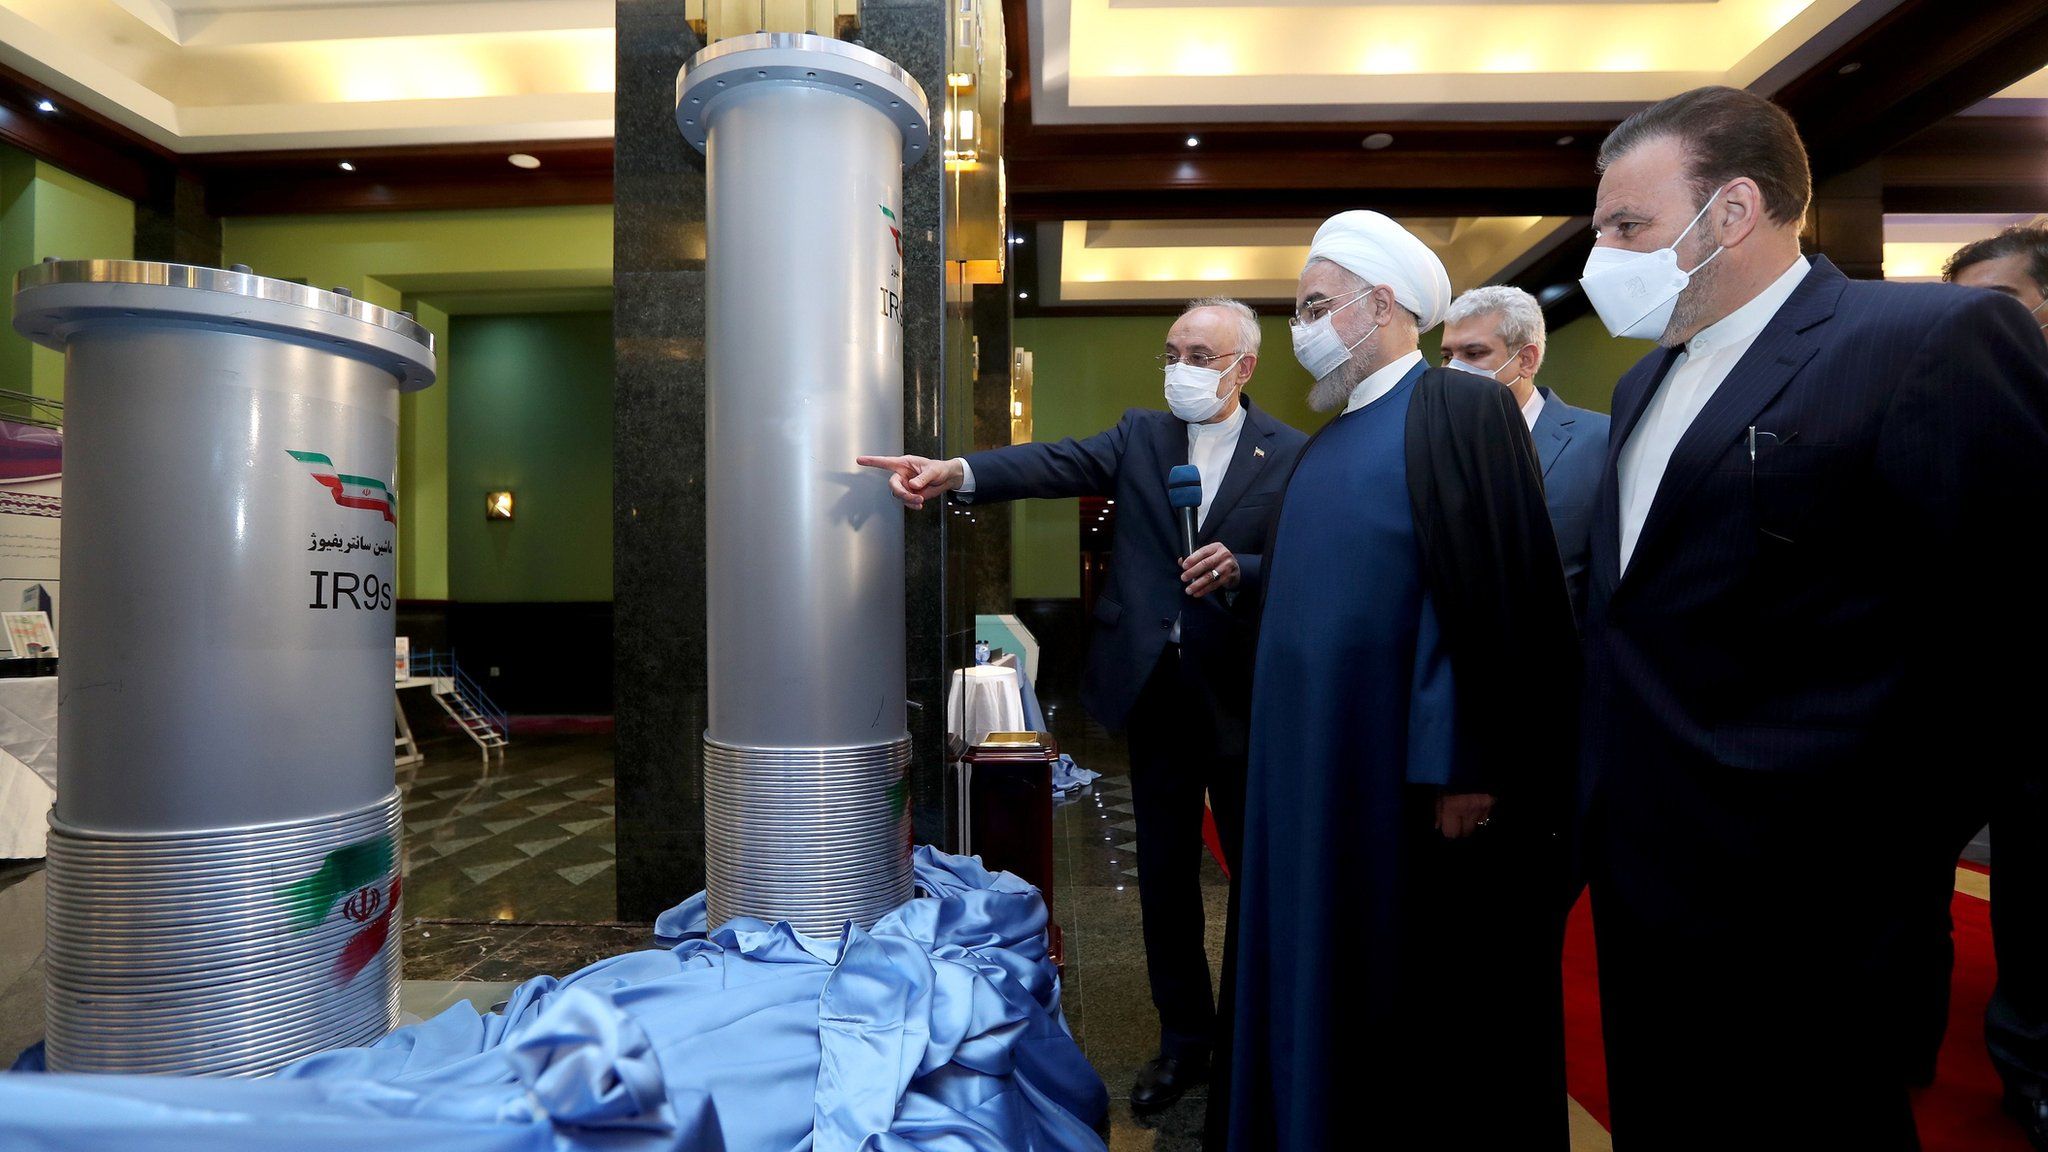 Iranian President Hassan Rouhani (2nd left) is shown nuclear technology in Tehran on 10 April 2021